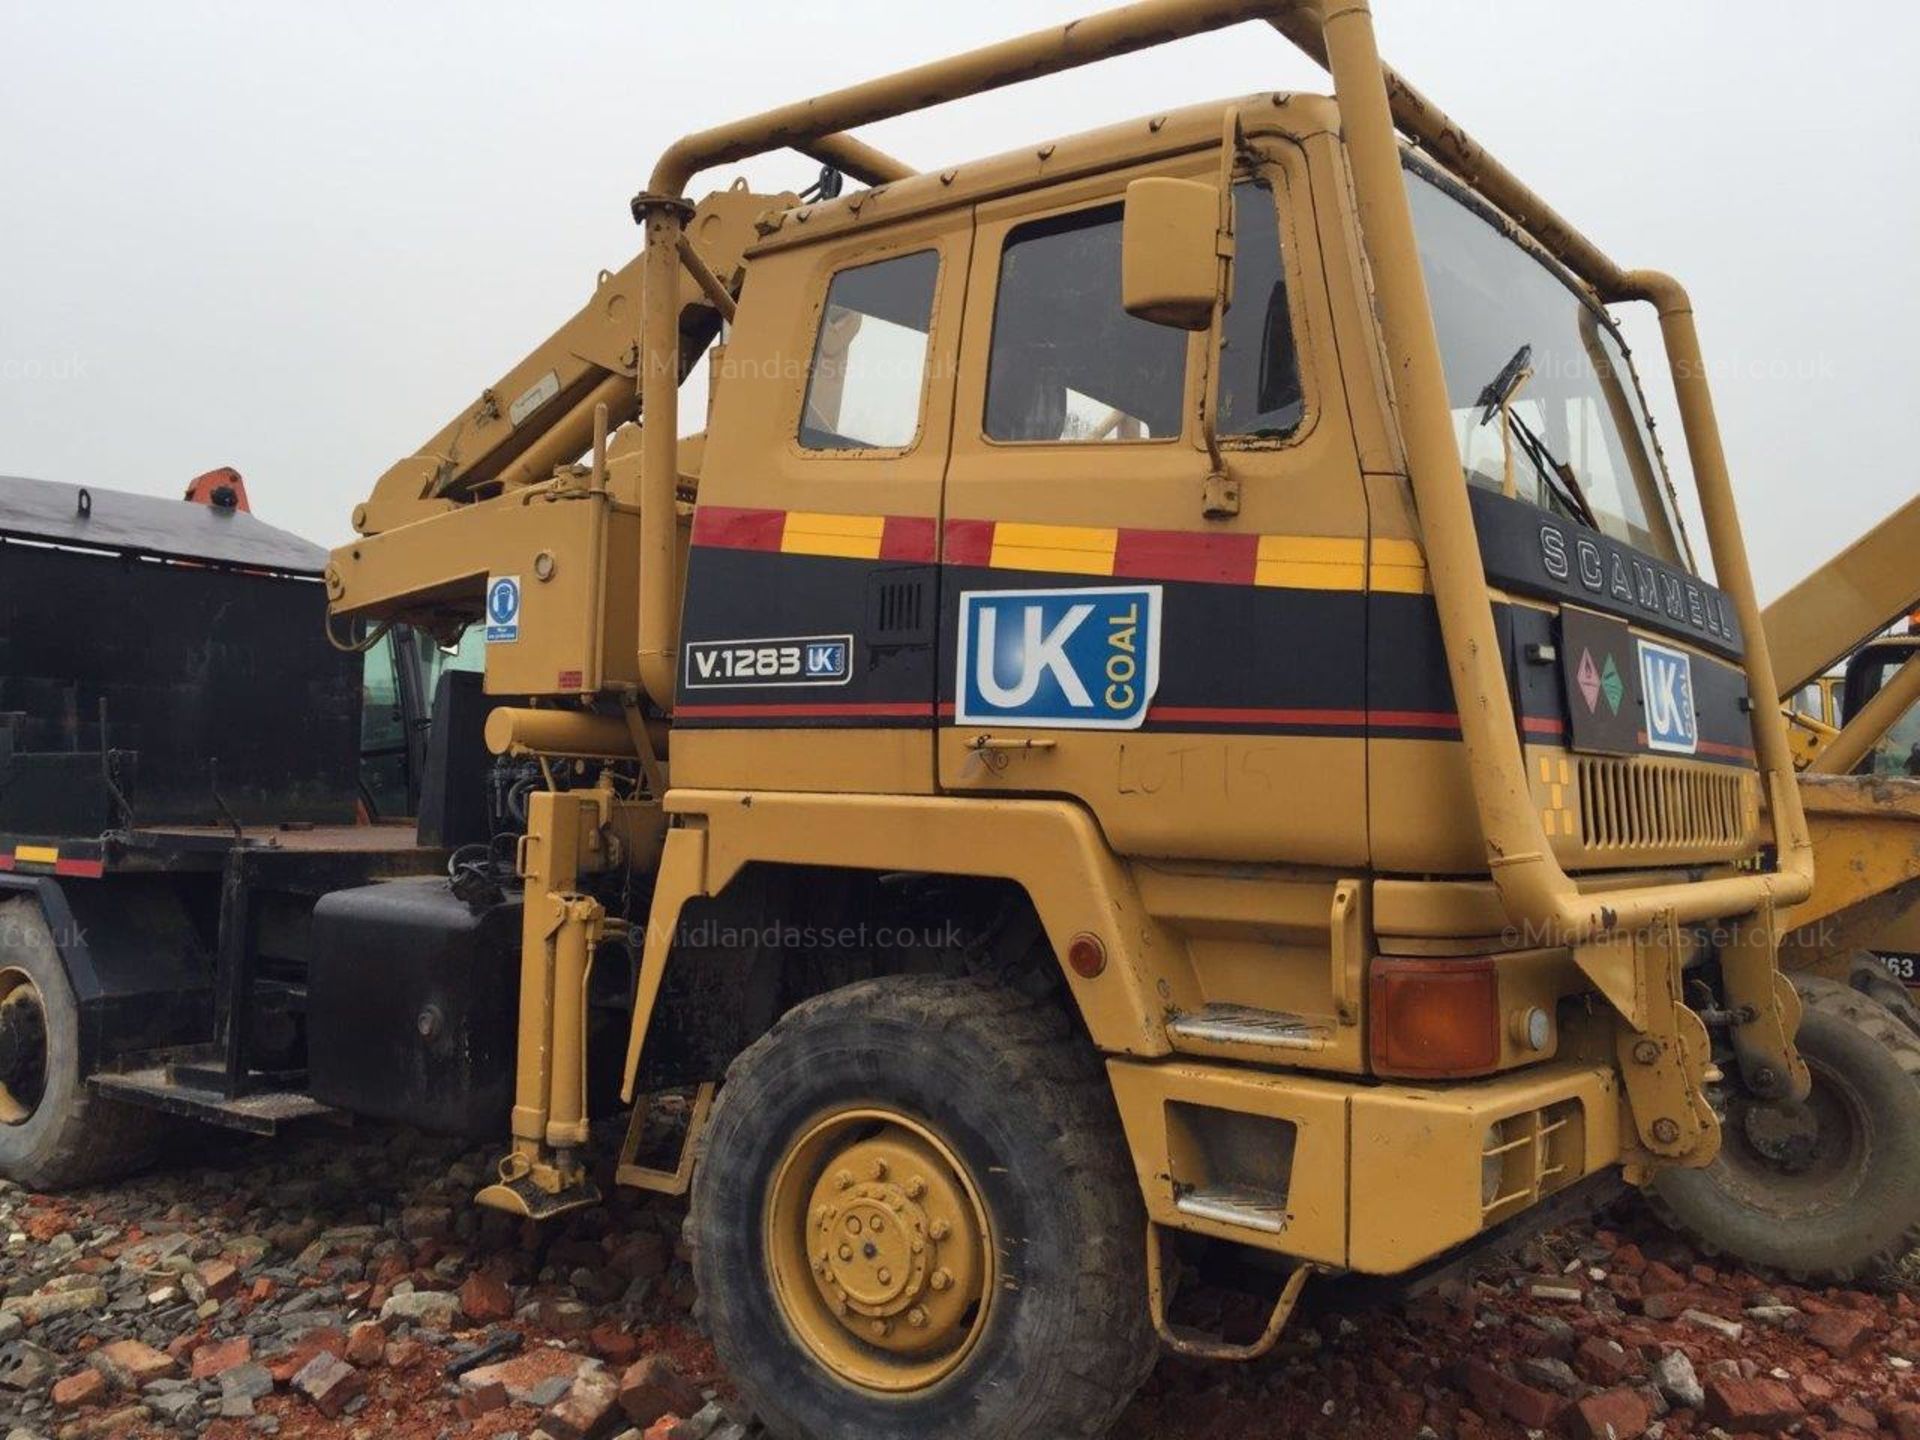 DS - SCAMMELL 6x6 LORRY WITH OIL TANKER AND HIAB CRANE EXPORT?   V.1283 CRANE MANUAL GEARBOX 6 WHEEL